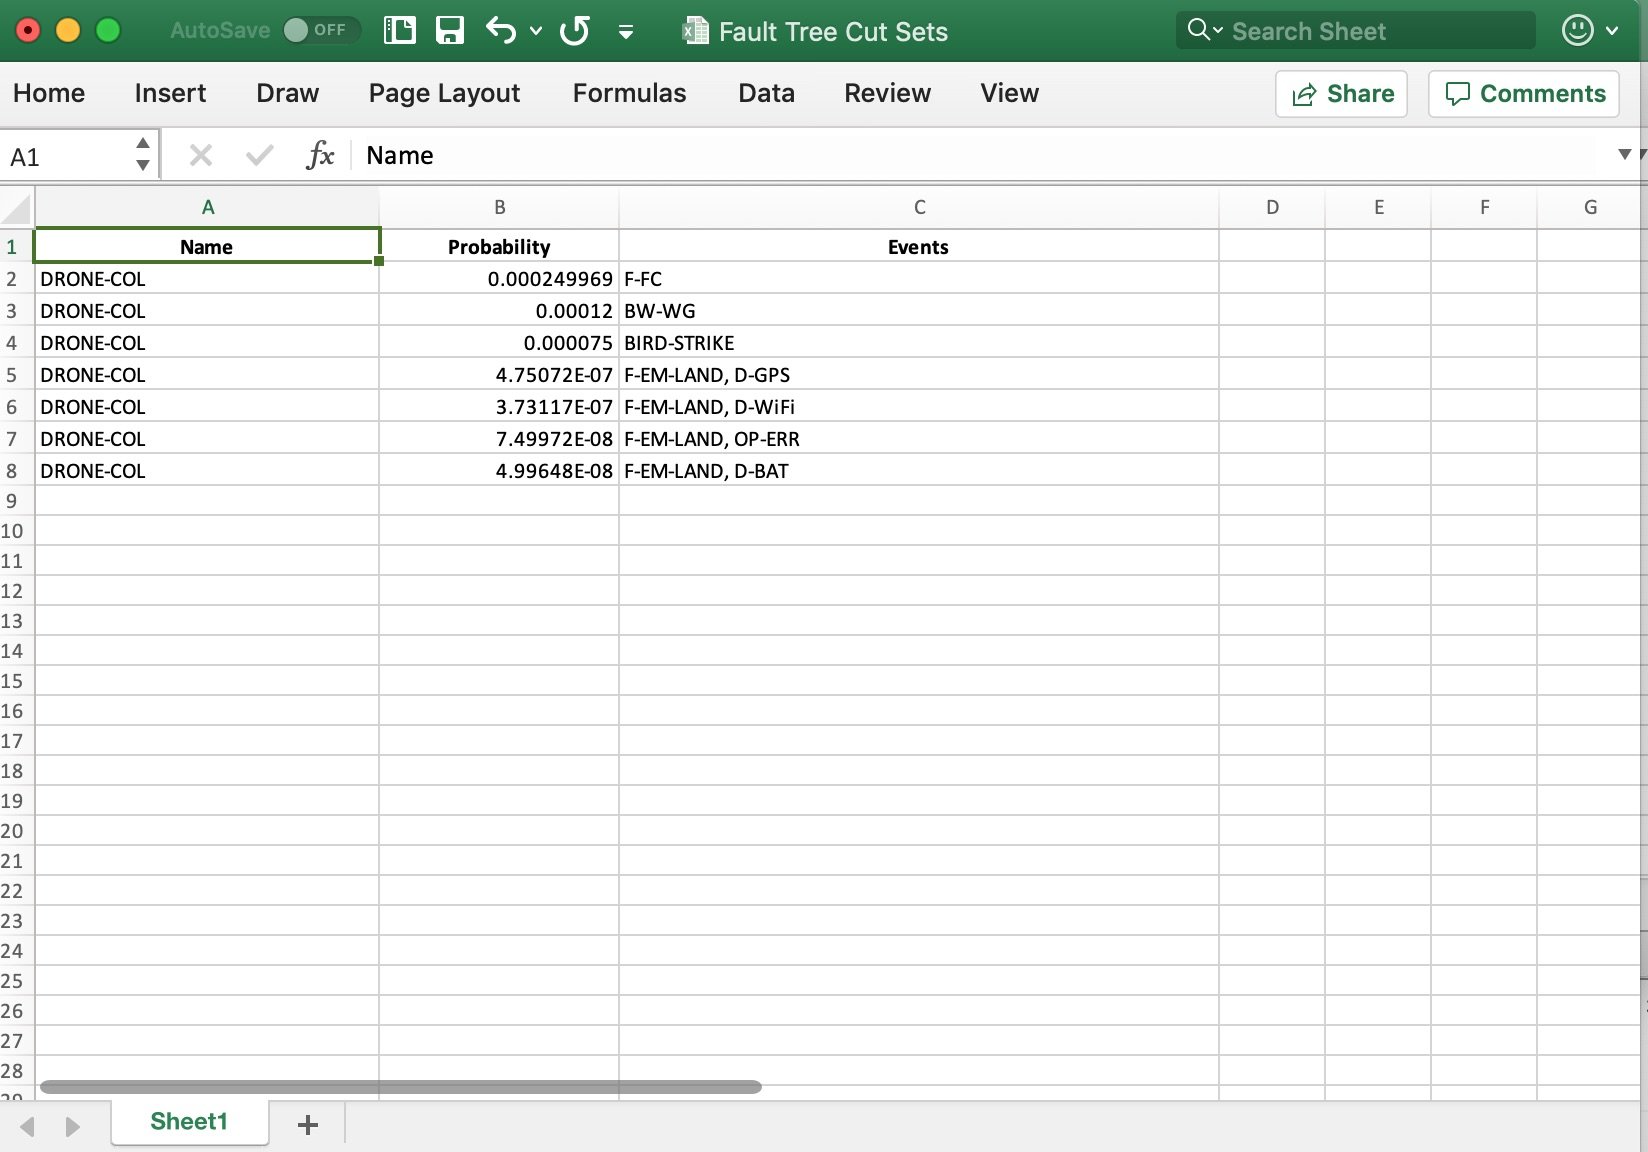 Fault Tree Export to Excel